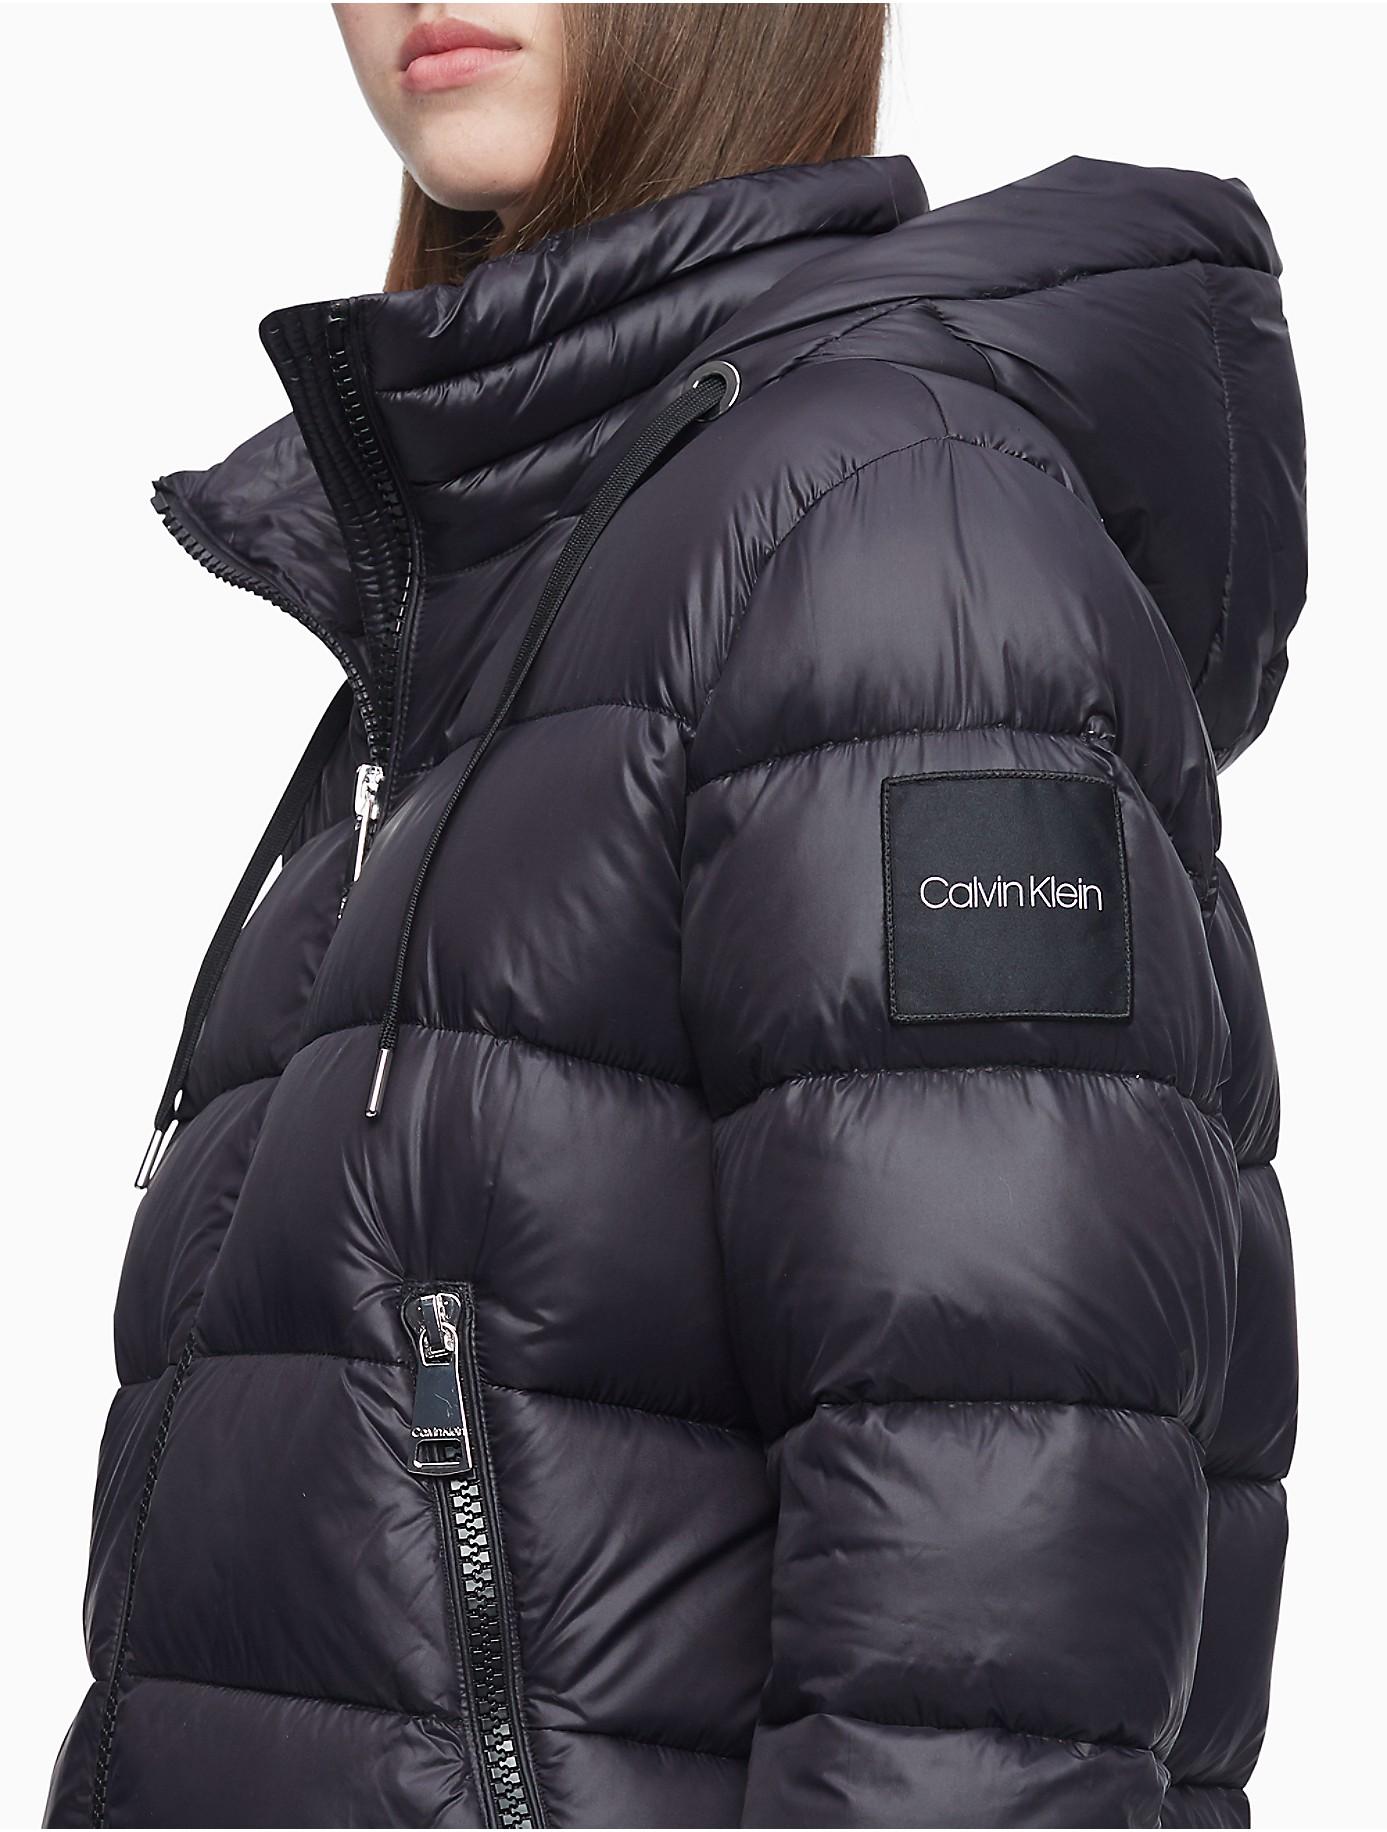 Calvin Klein Logo Hooded Puffer Jacket Top Sellers, 58% OFF |  www.accede-web.com